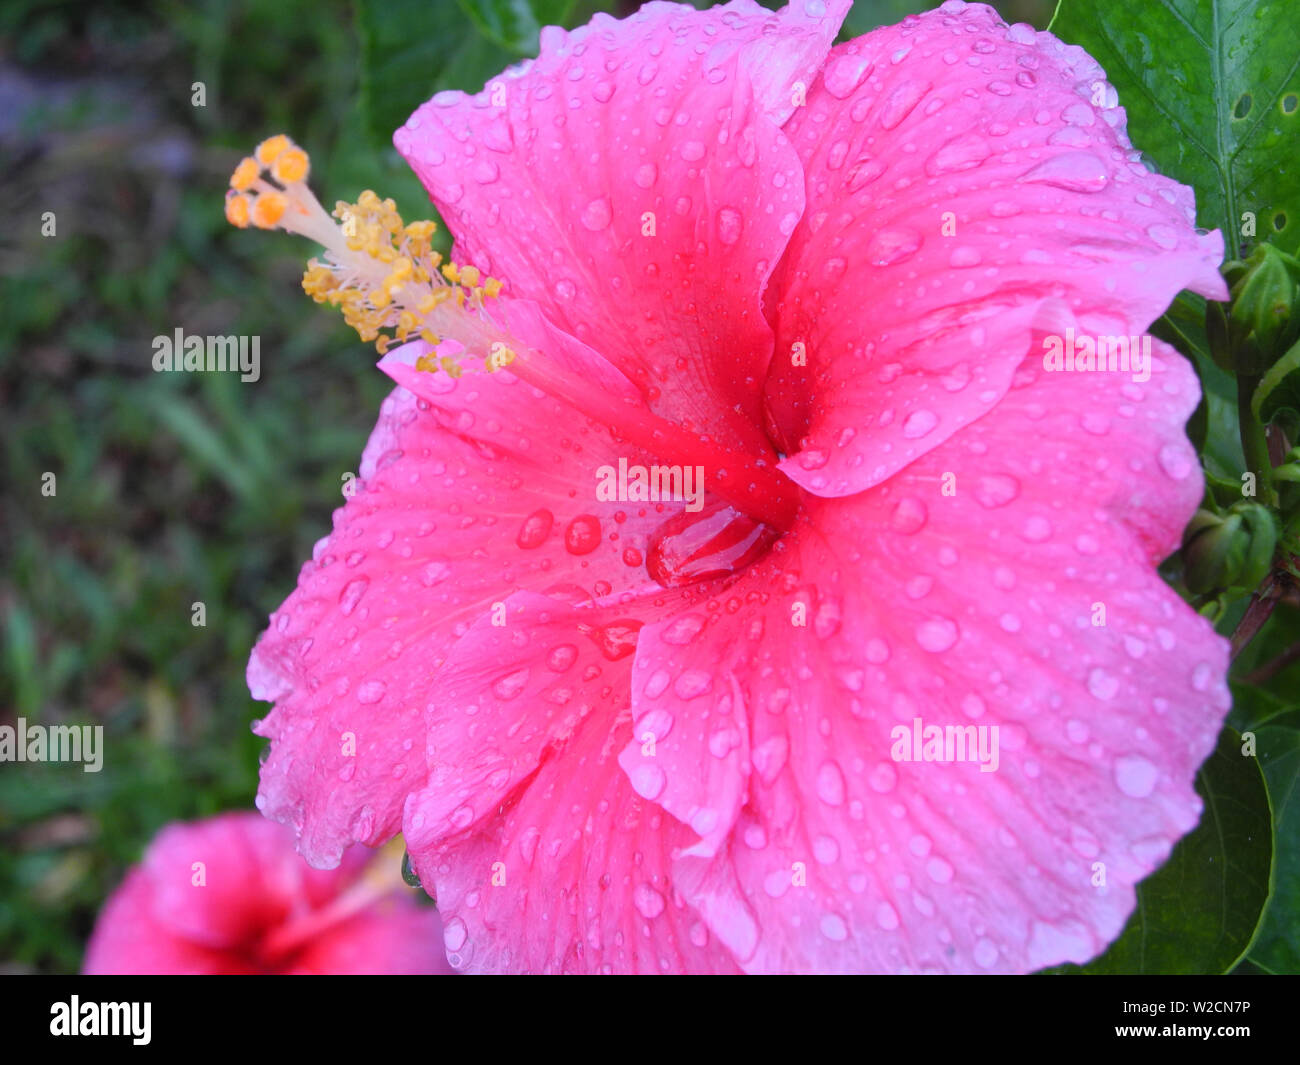 Tropical plant Hibiscus with rose color flowers, Kerala, Kochi Stock Photo